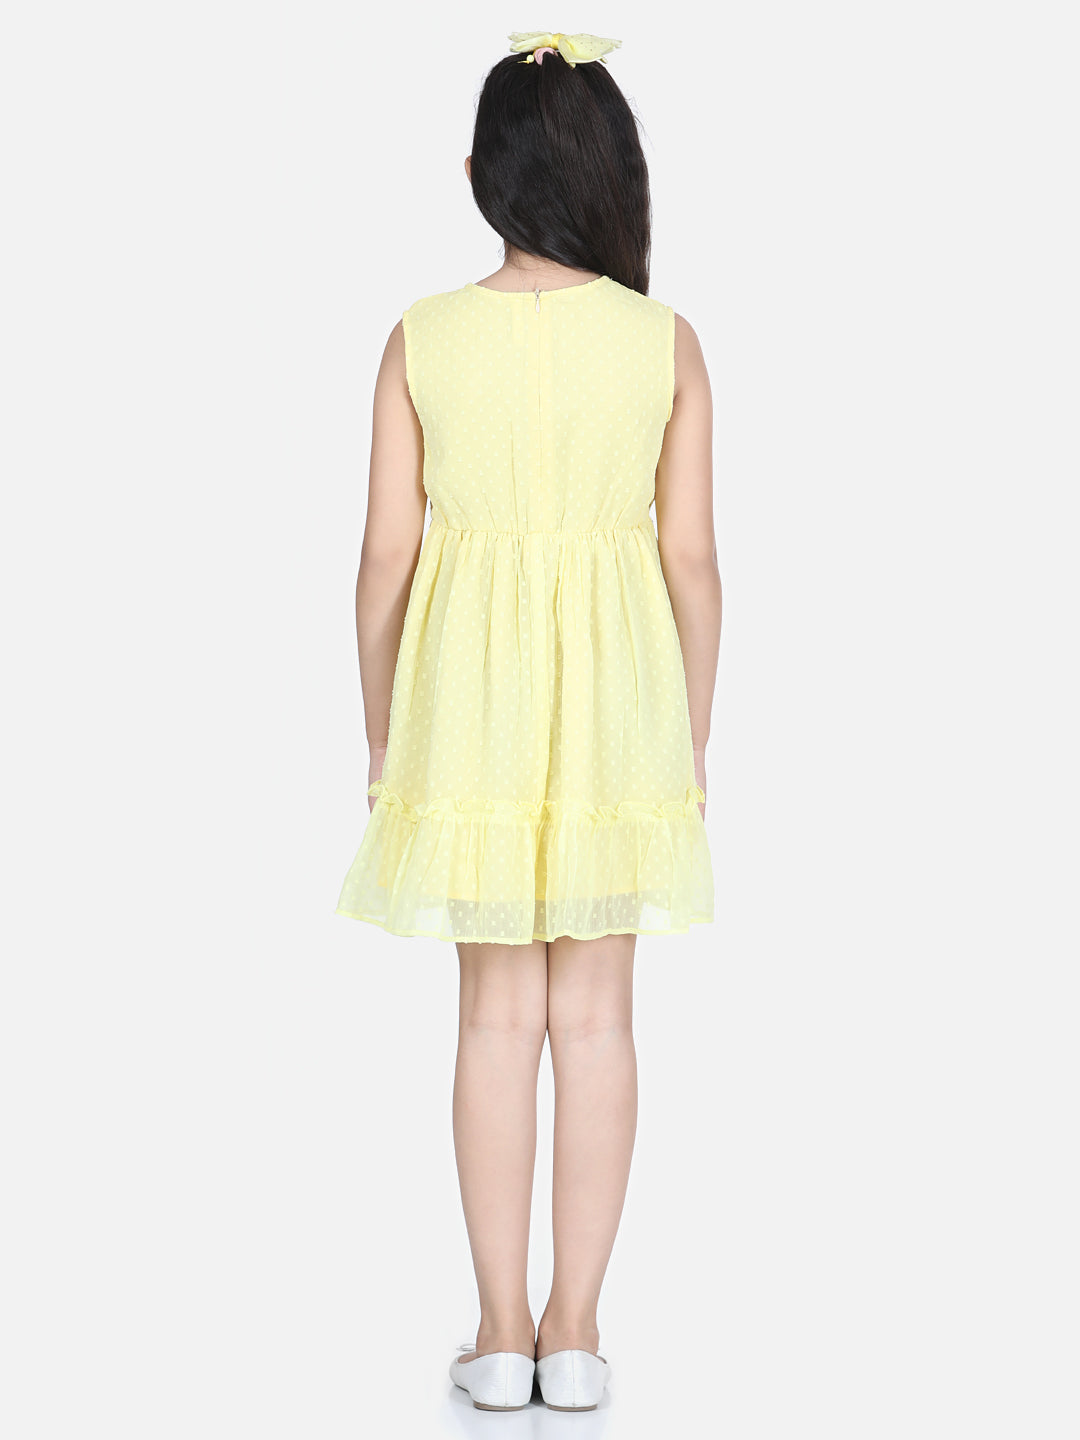 Girls Yellow Polyester Self Design Dress with Net and Lace Inserts